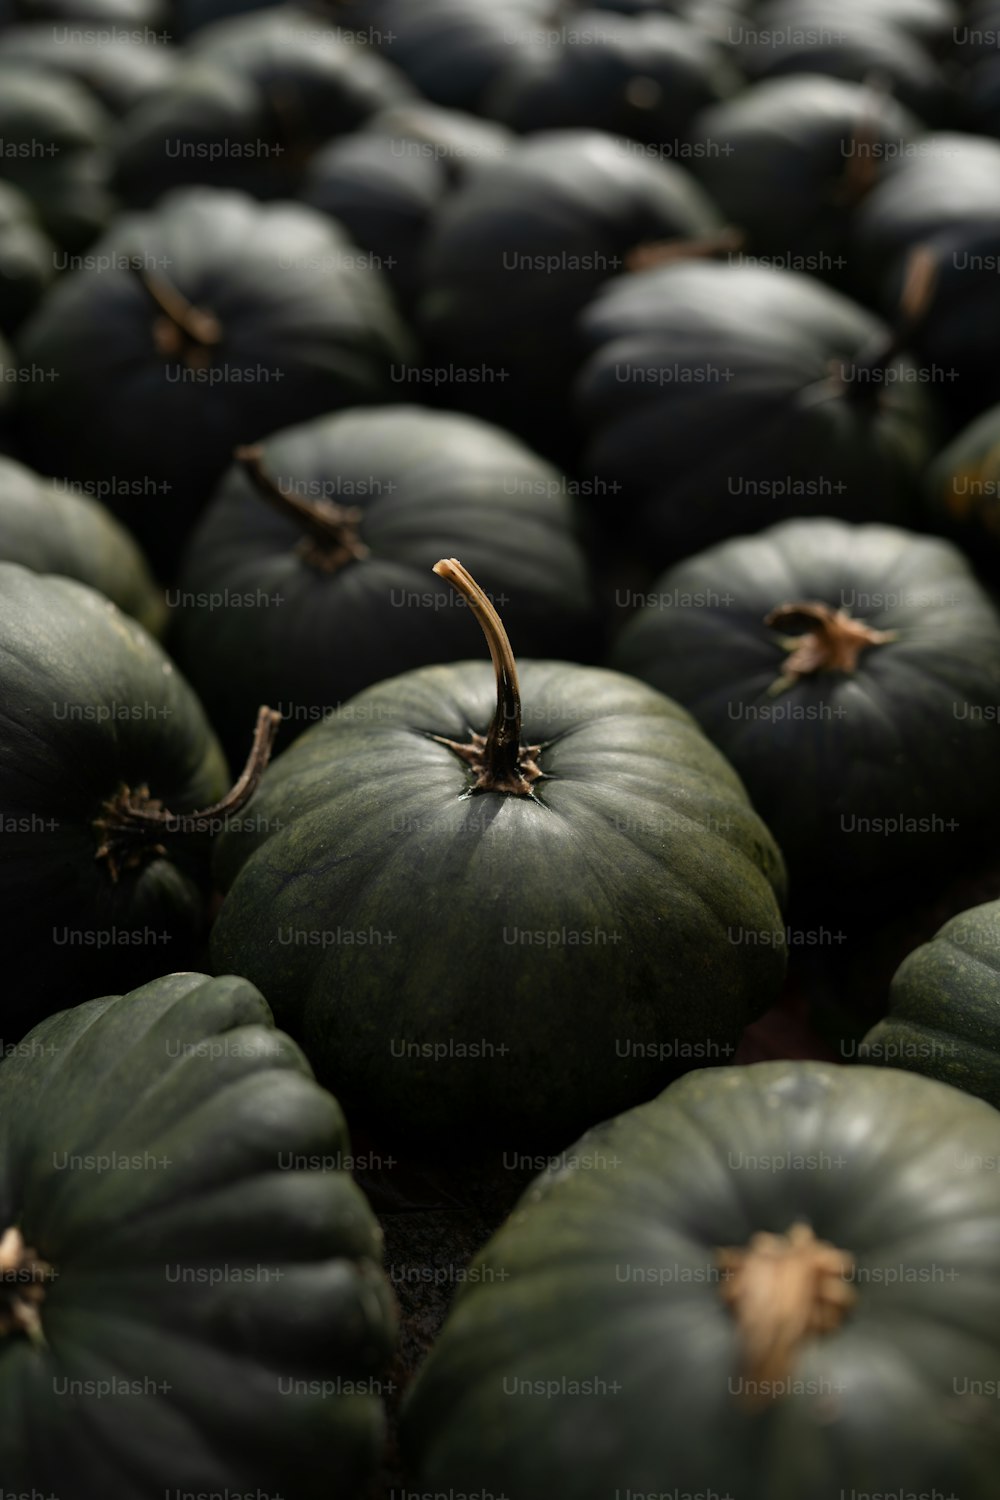 a group of green pumpkins sitting on top of each other